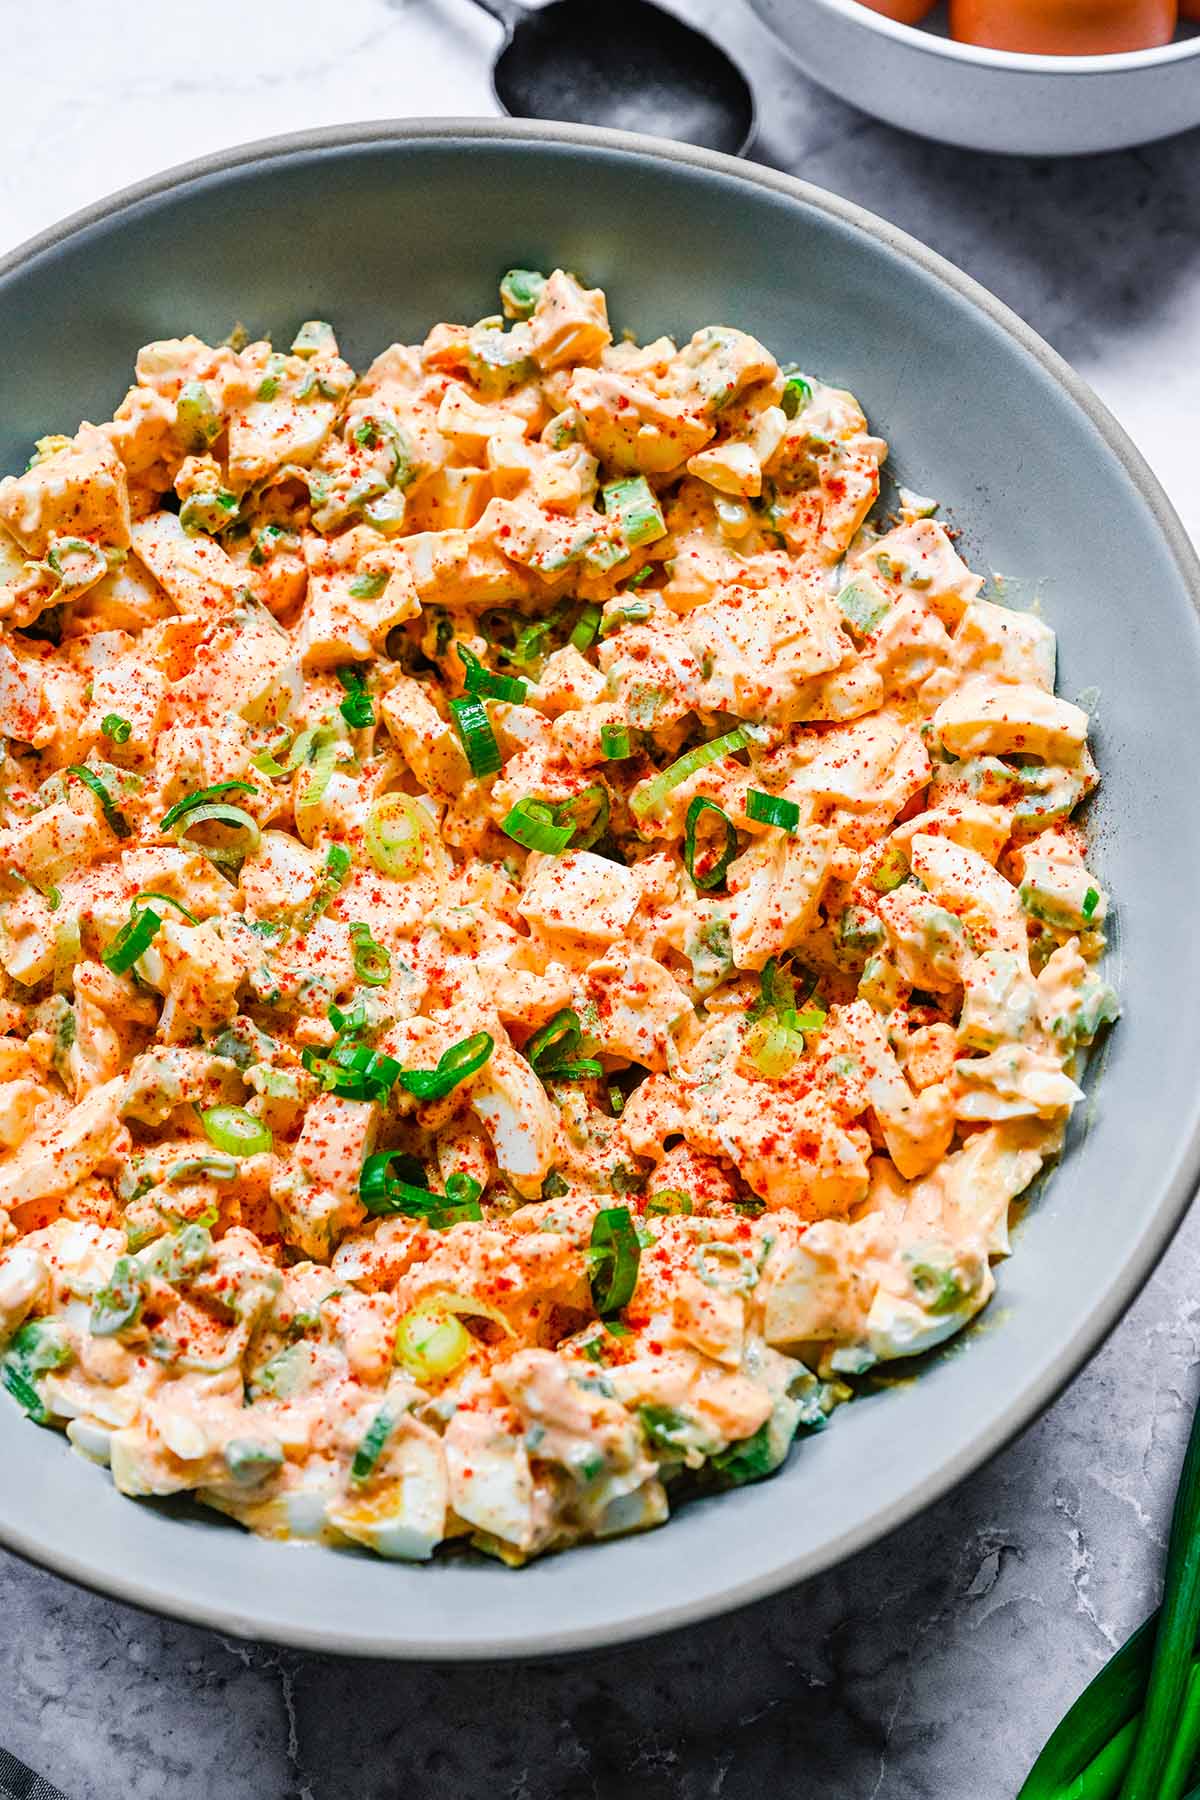 A close up view of Deviled Egg Salad in a shallow blue-grey bowl, garnished with sliced green onion and paprika.